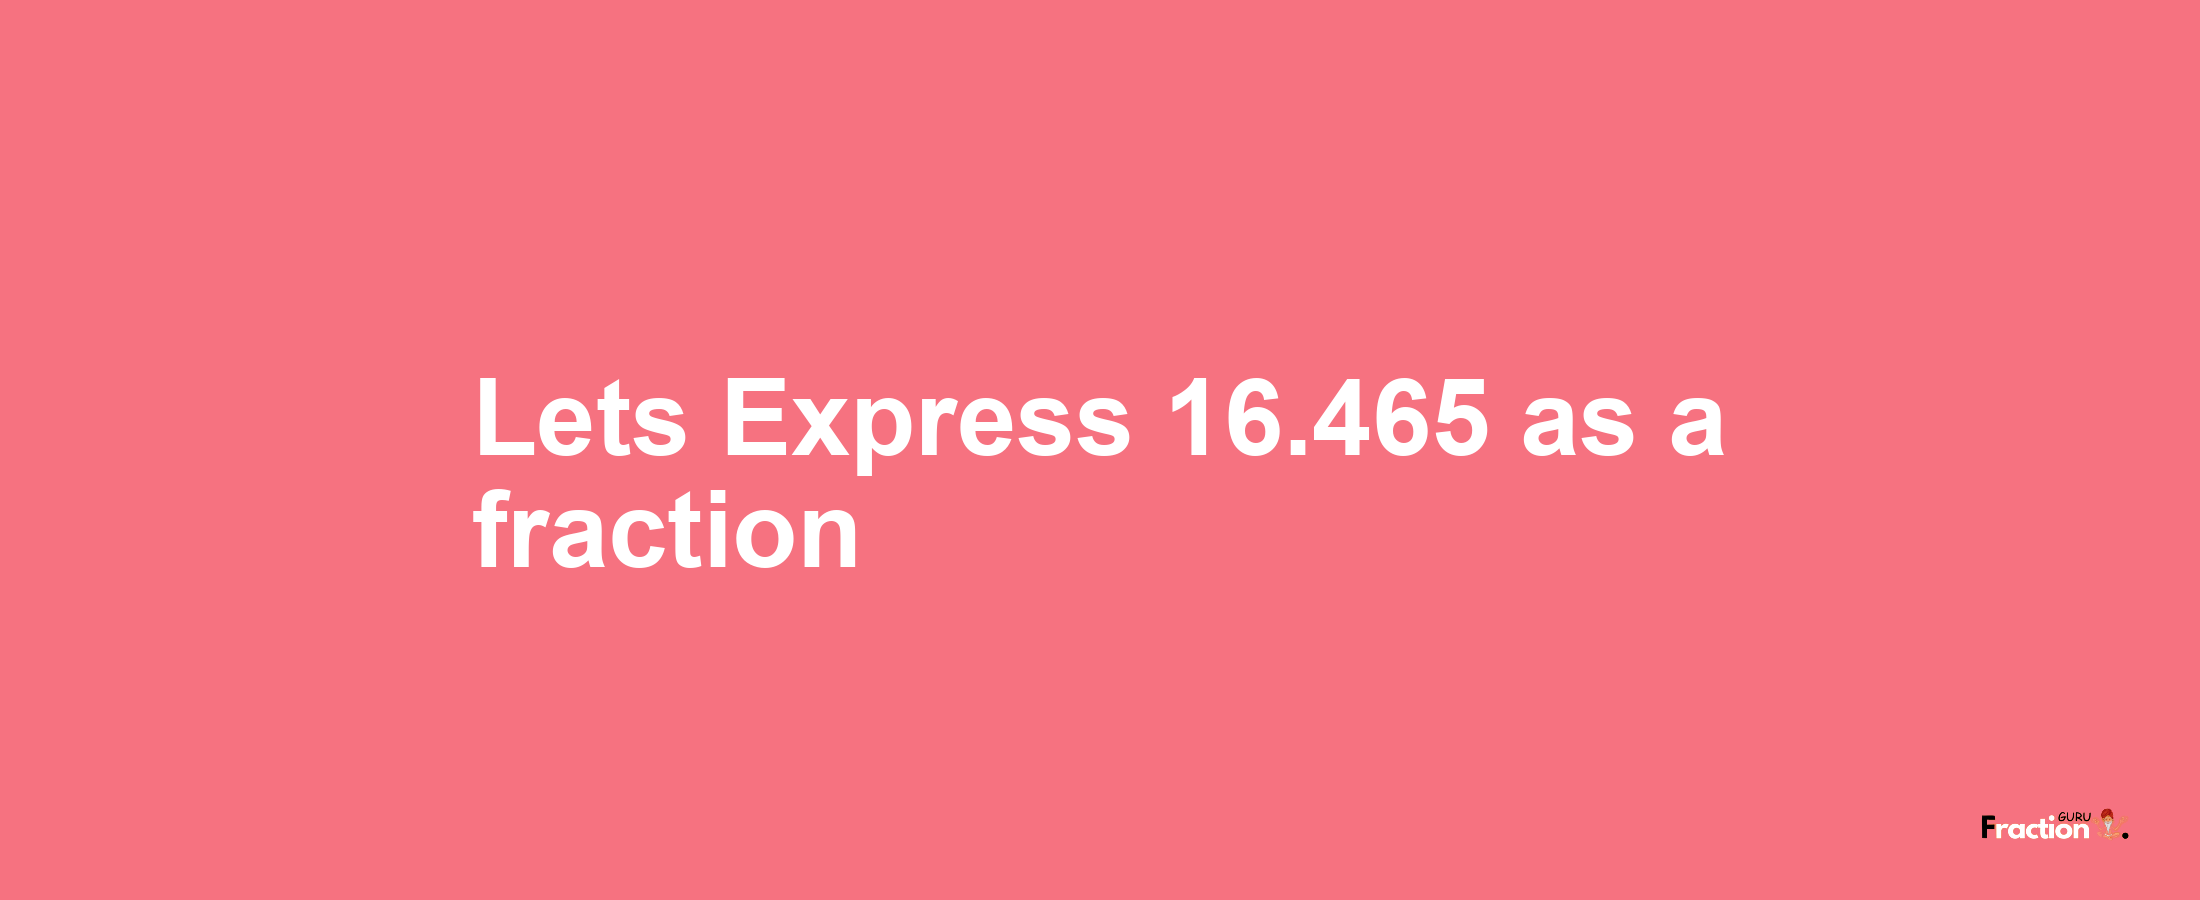 Lets Express 16.465 as afraction